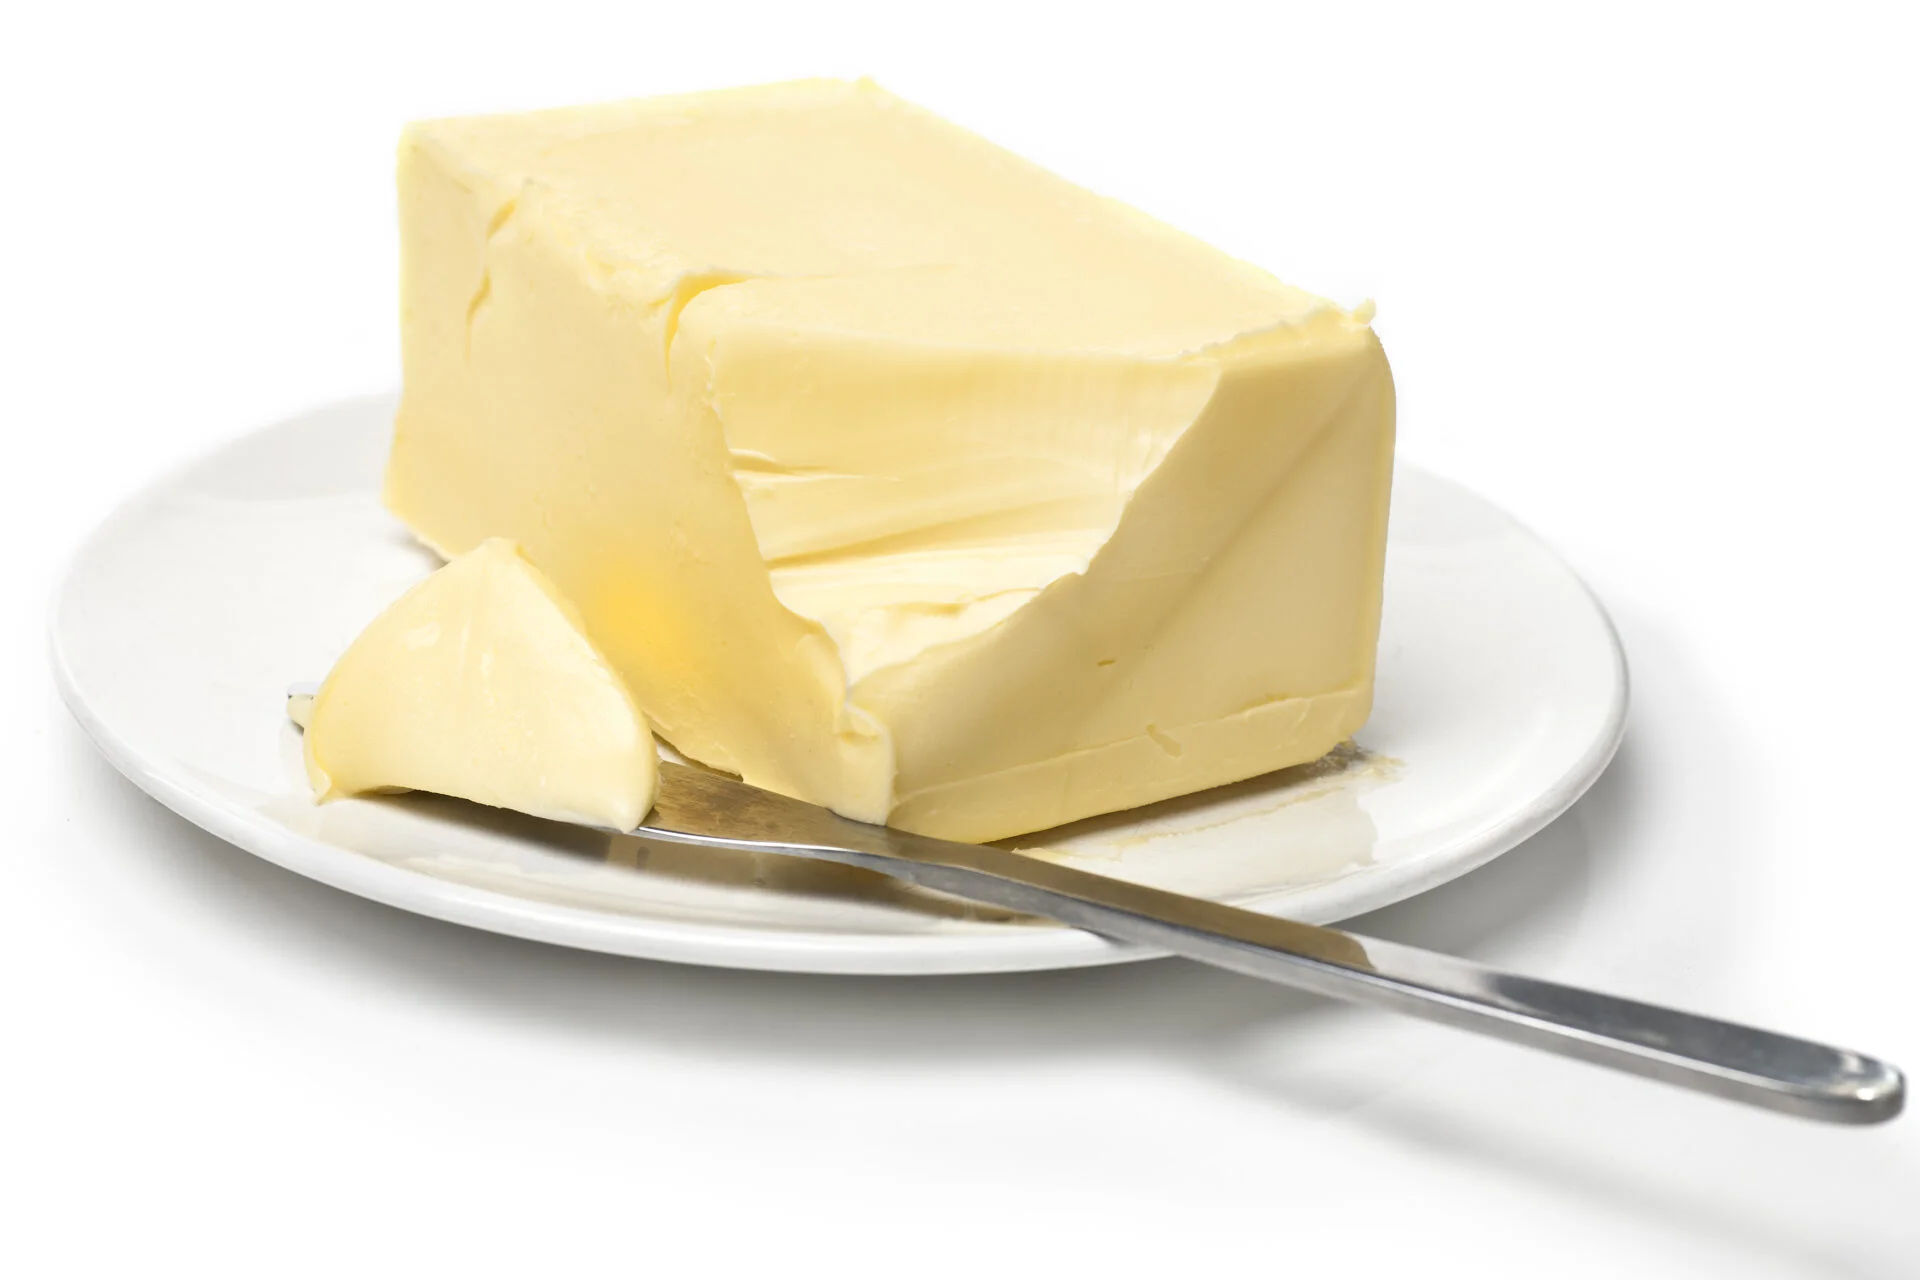 Piece of butter on white plate with knife. White background and shallow focus.